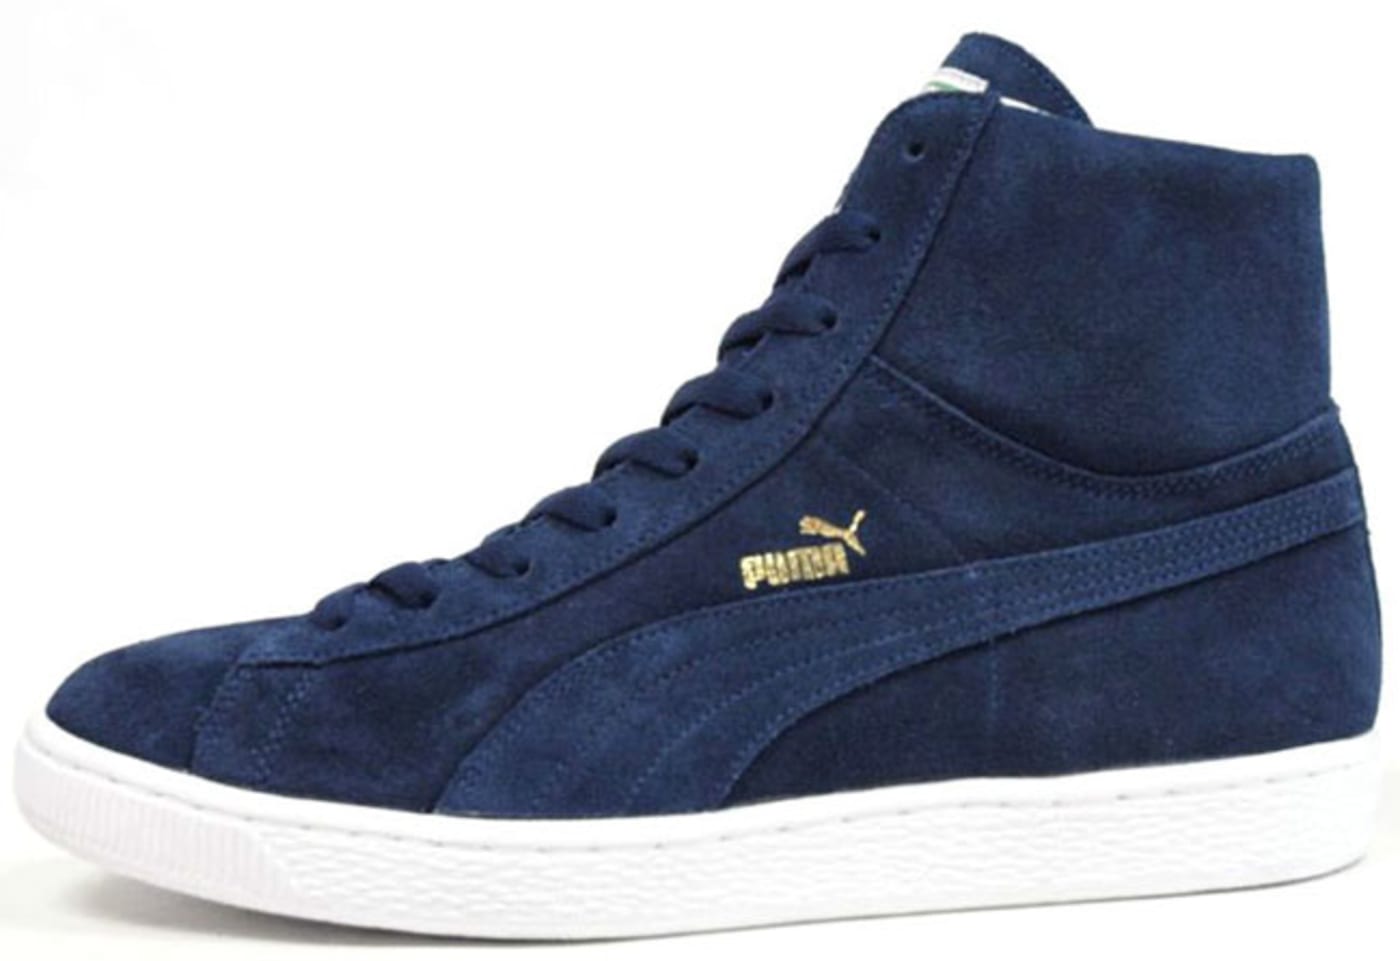 Puma Suede Mid Made in Japan “Navy/White” | Complex